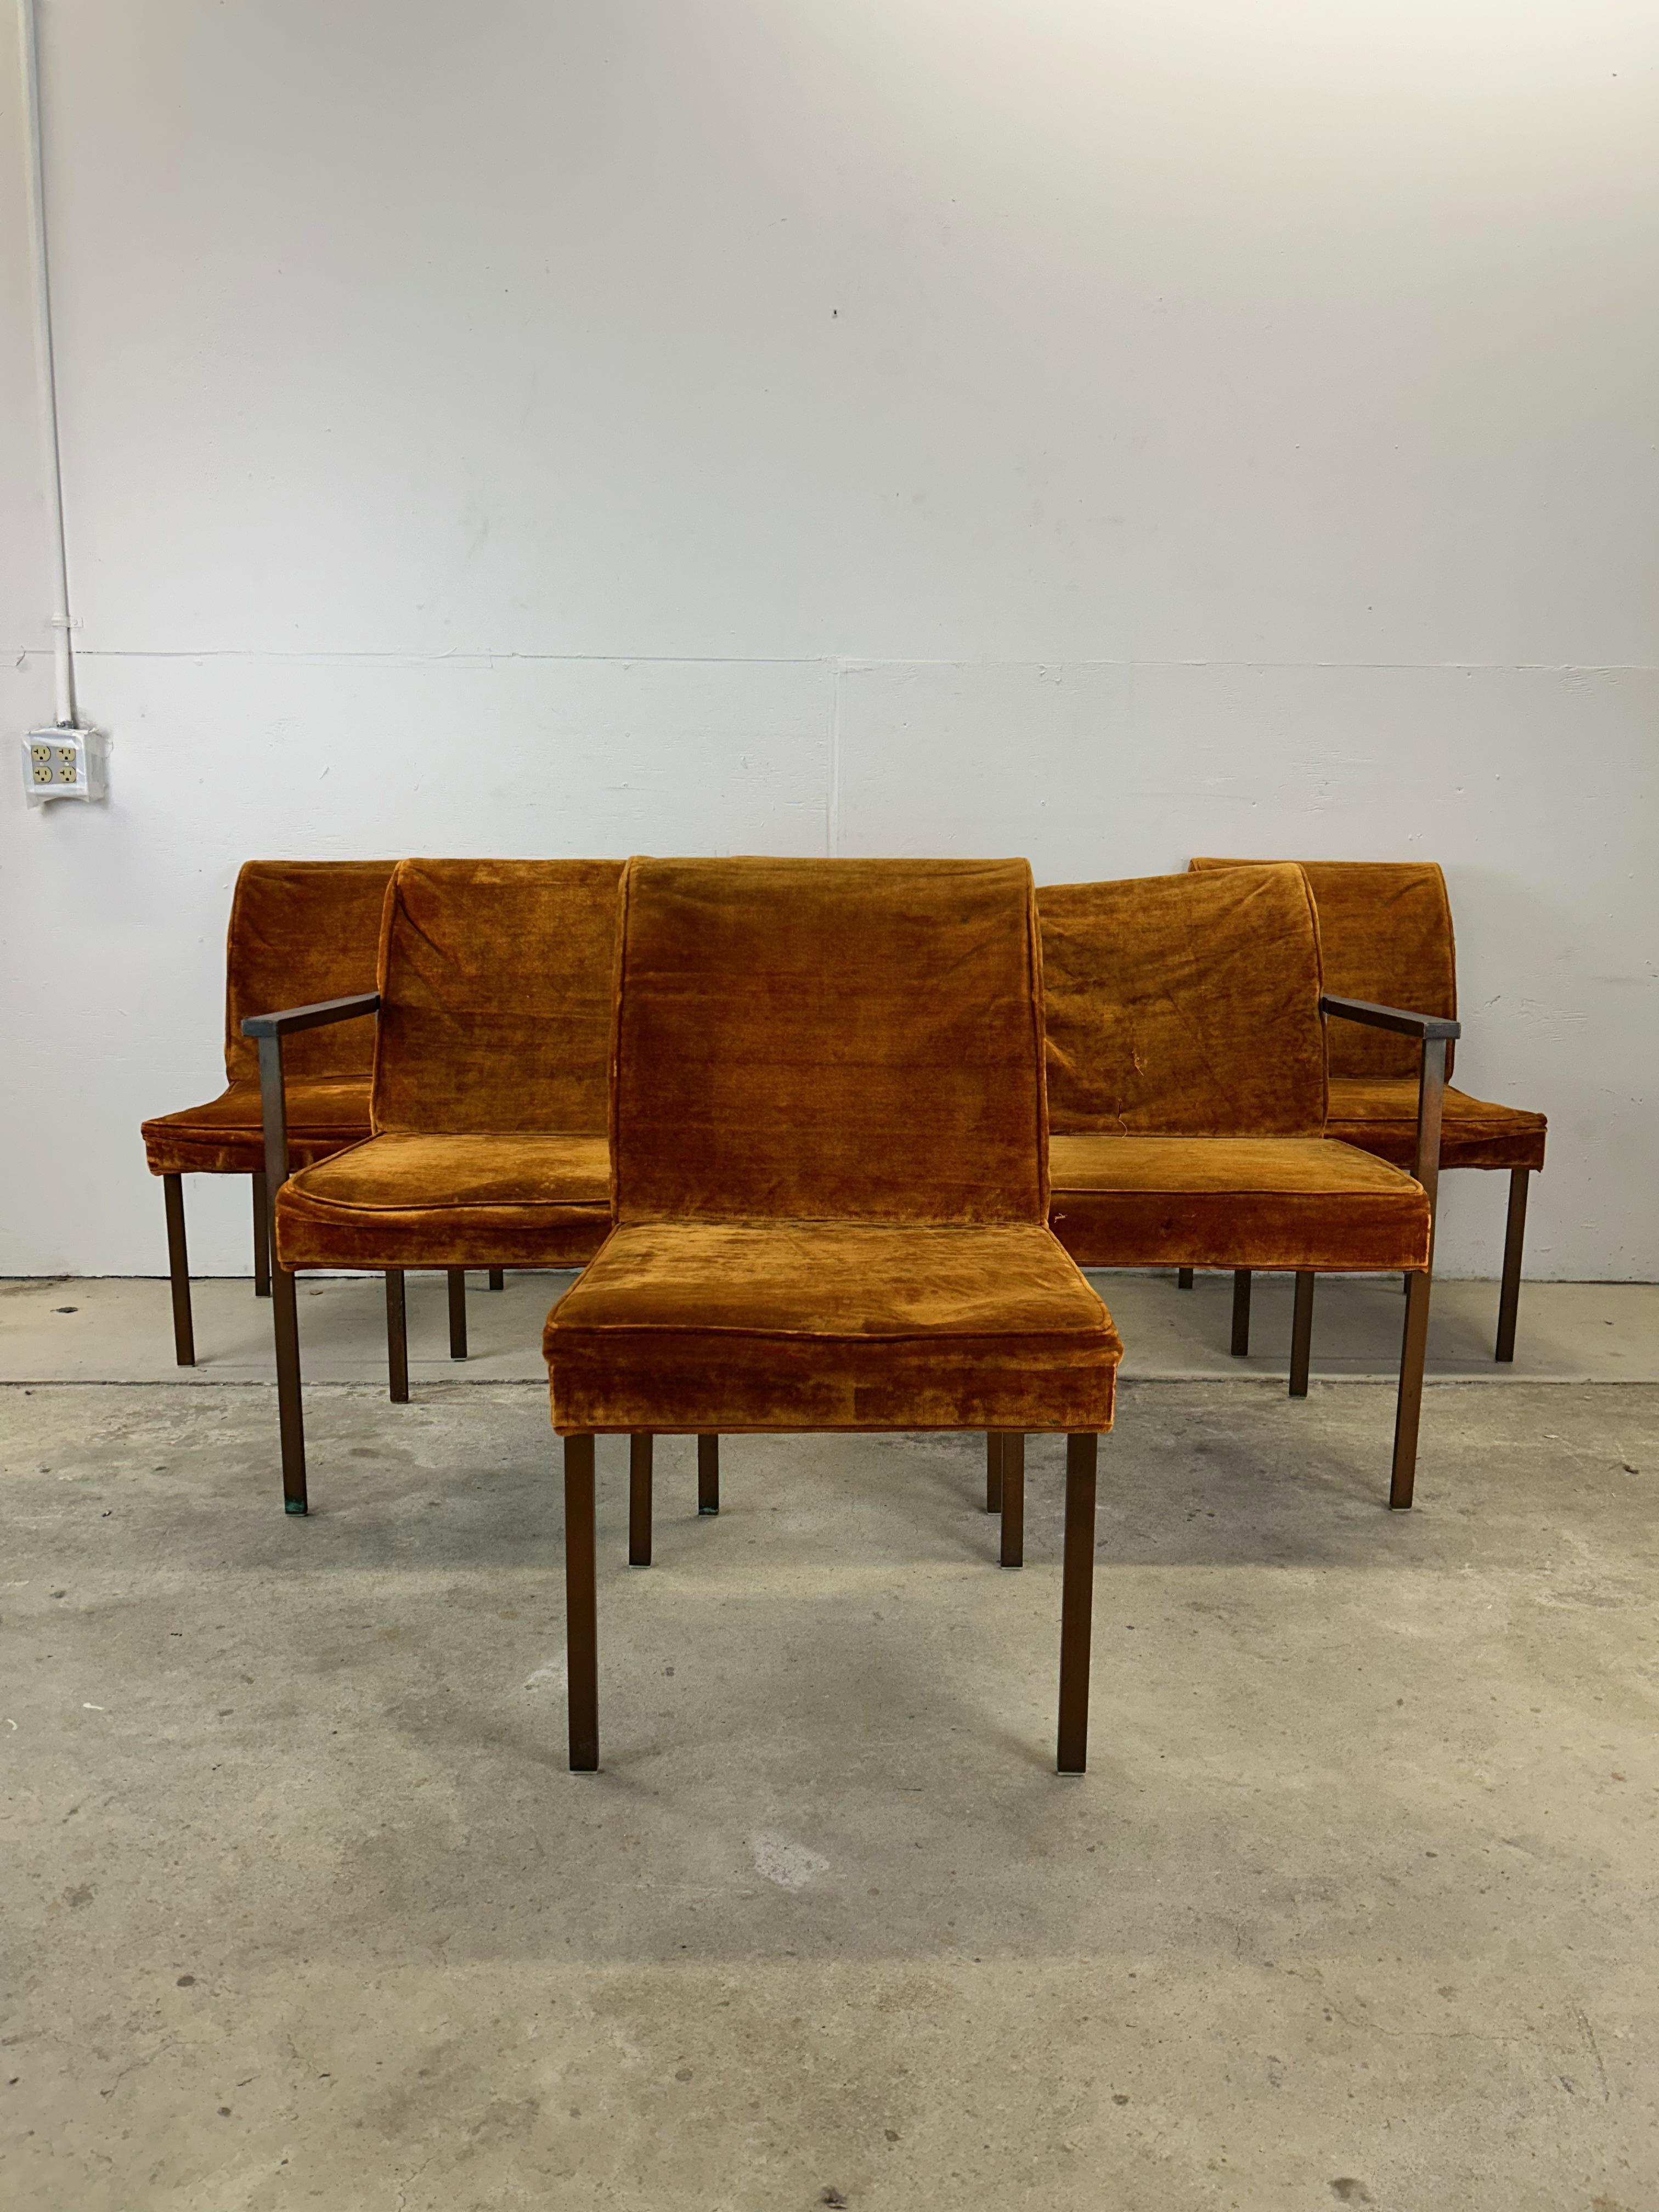 This set of six mid century dining chairs by Lane Furniture feature vintage burnt orange upholstery, metal frame and solid walnut arm rests.

Dimensions: 23w 21d 33h 17sh 25.5ah

Condition: This set of chairs is desperately in need of restoration.